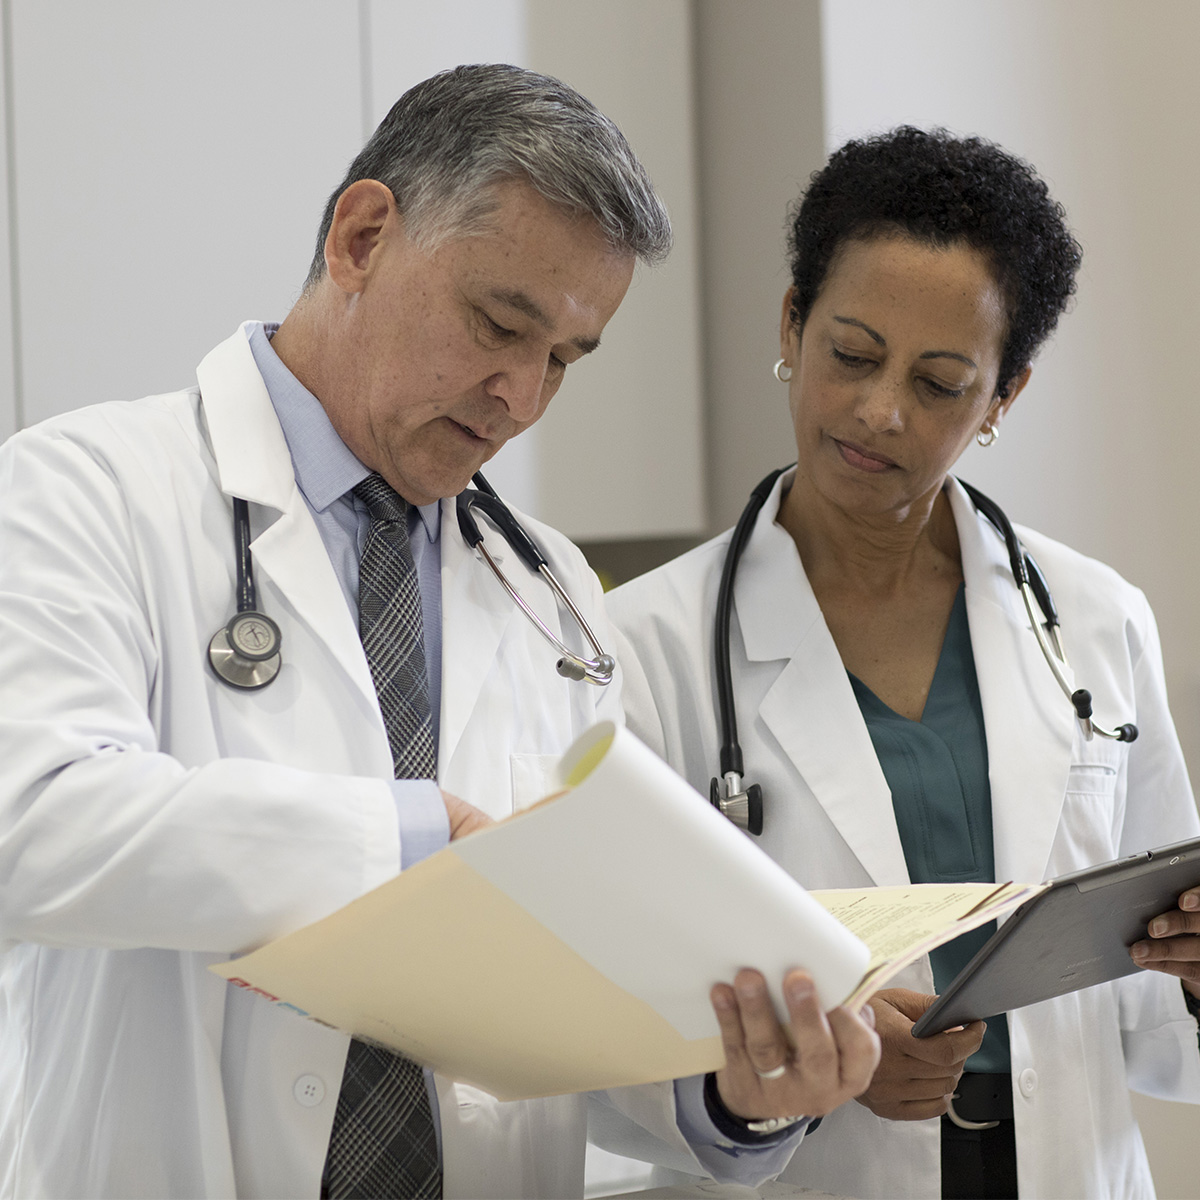 Two doctors side by side reviewing files.